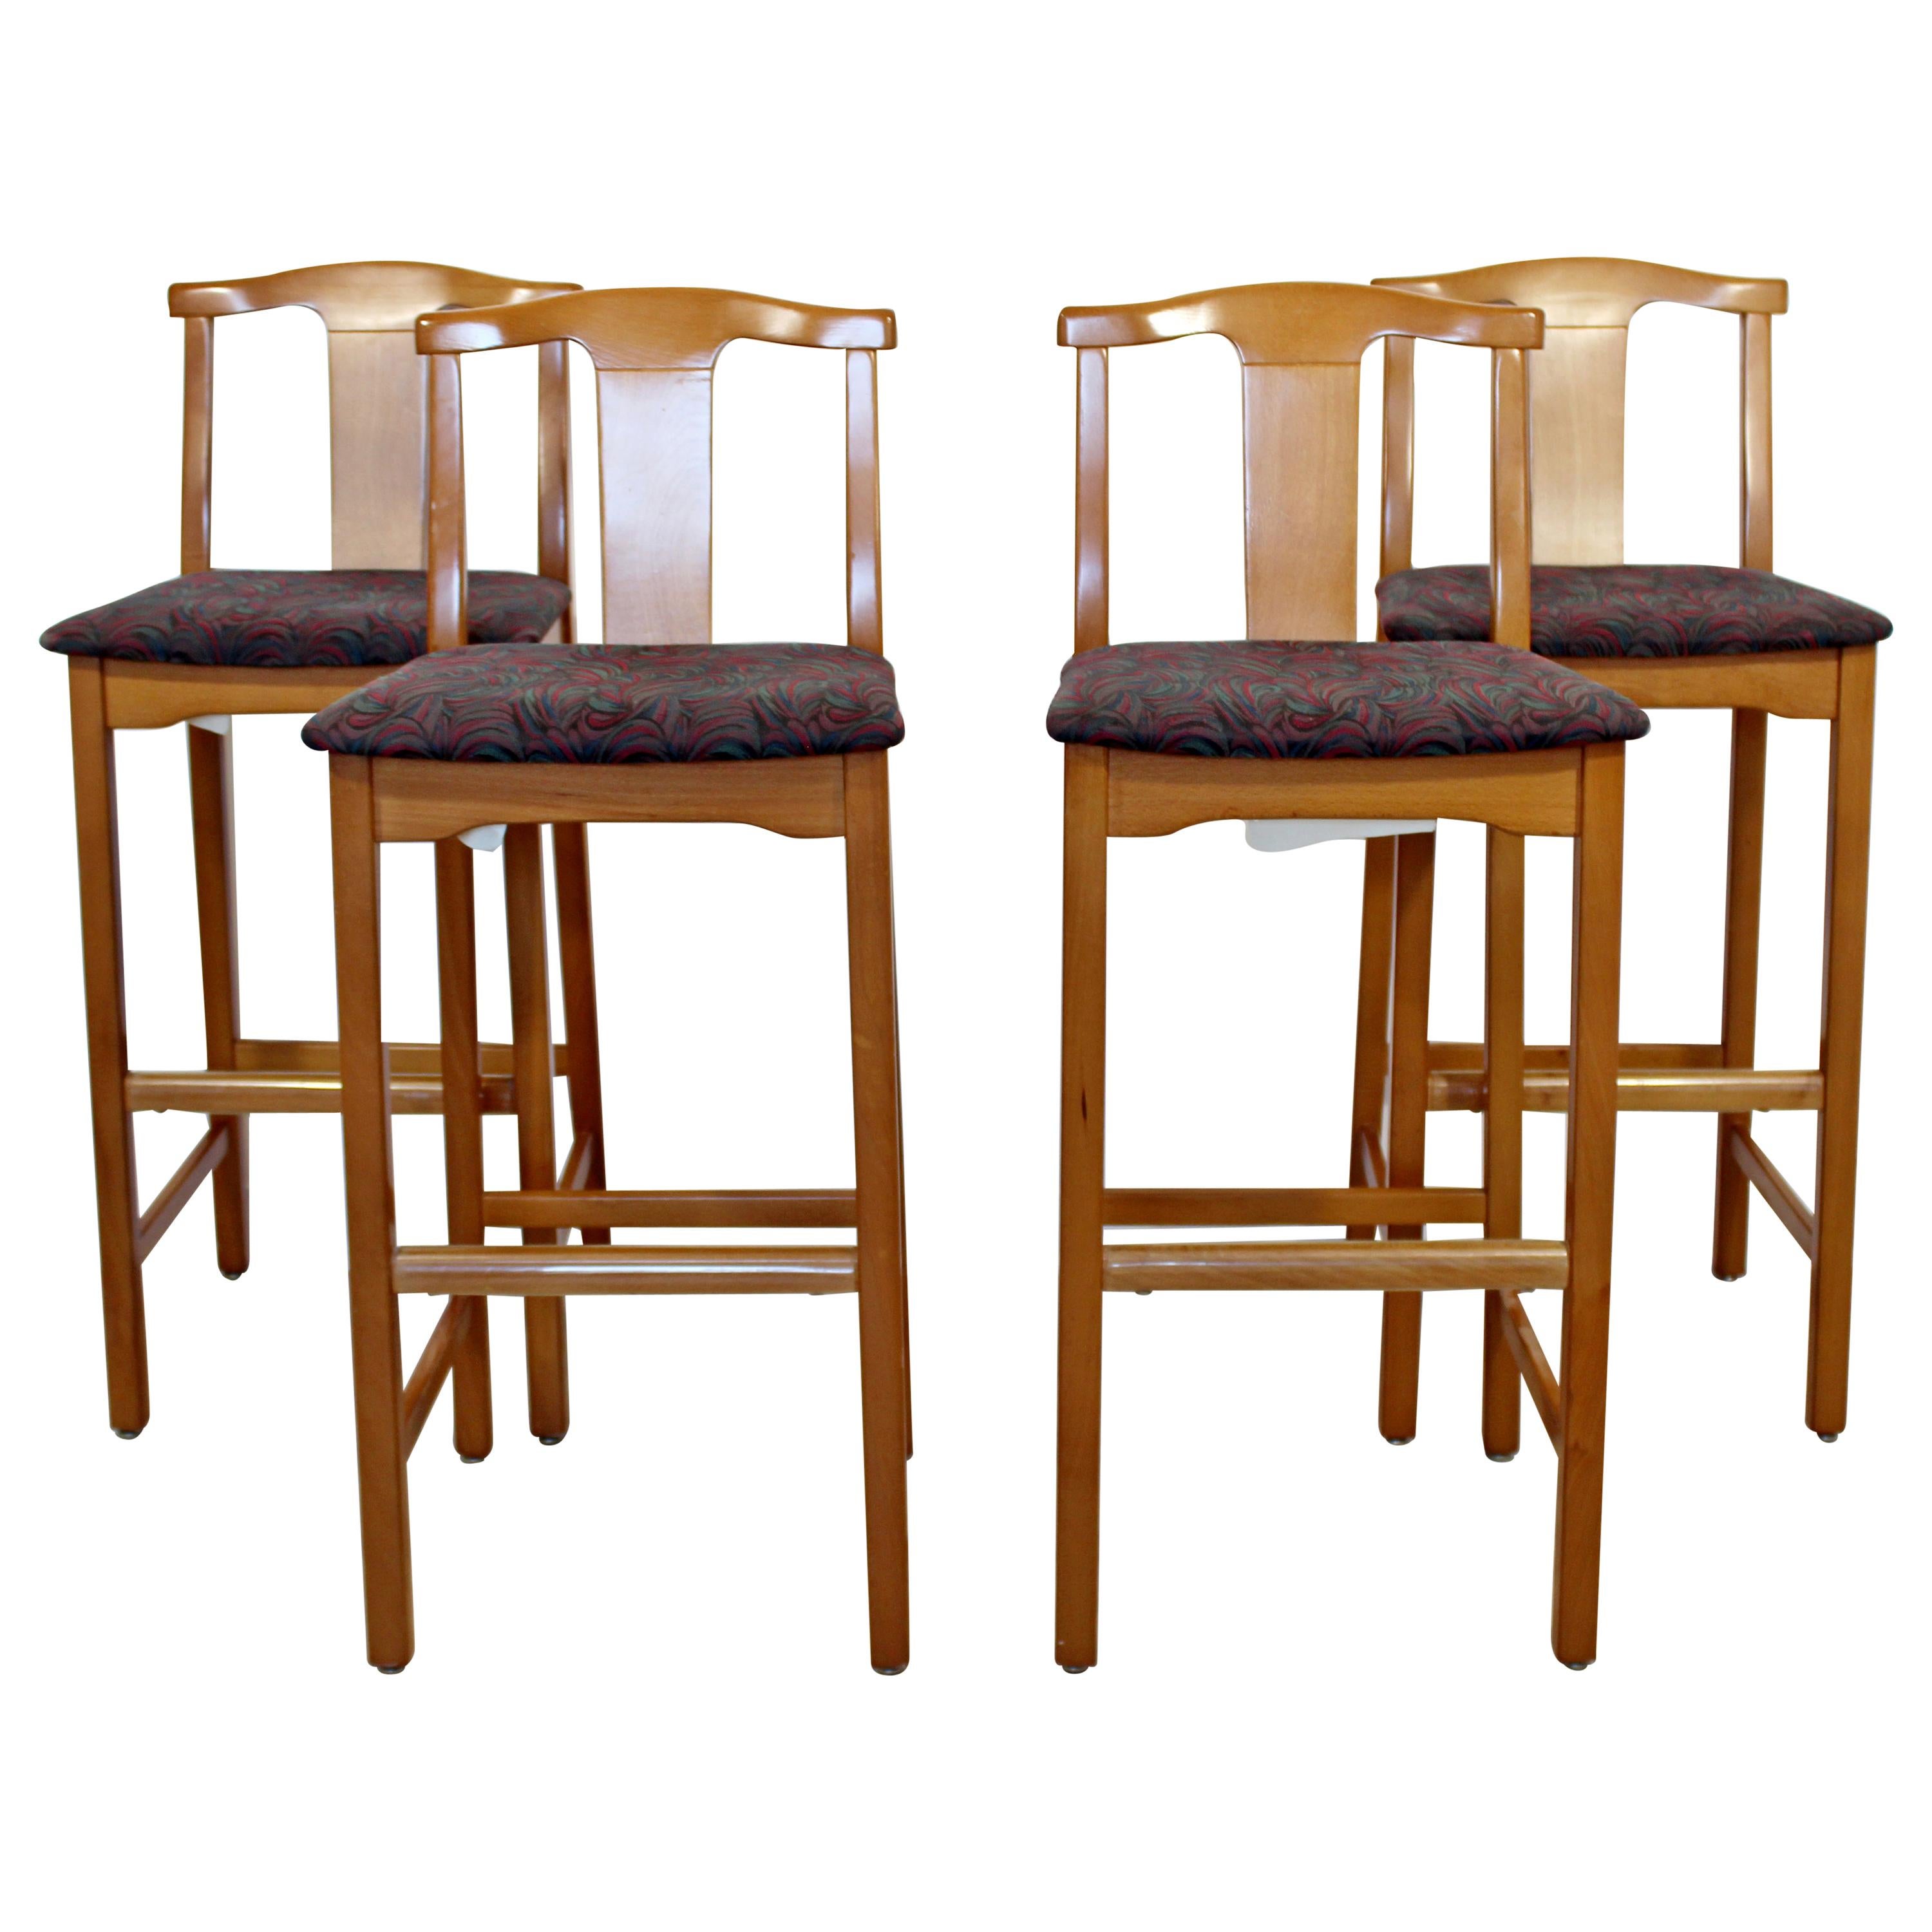 Contemporary Modernist Lowenstein Set of 4 Counter Bar Stools, 1990s